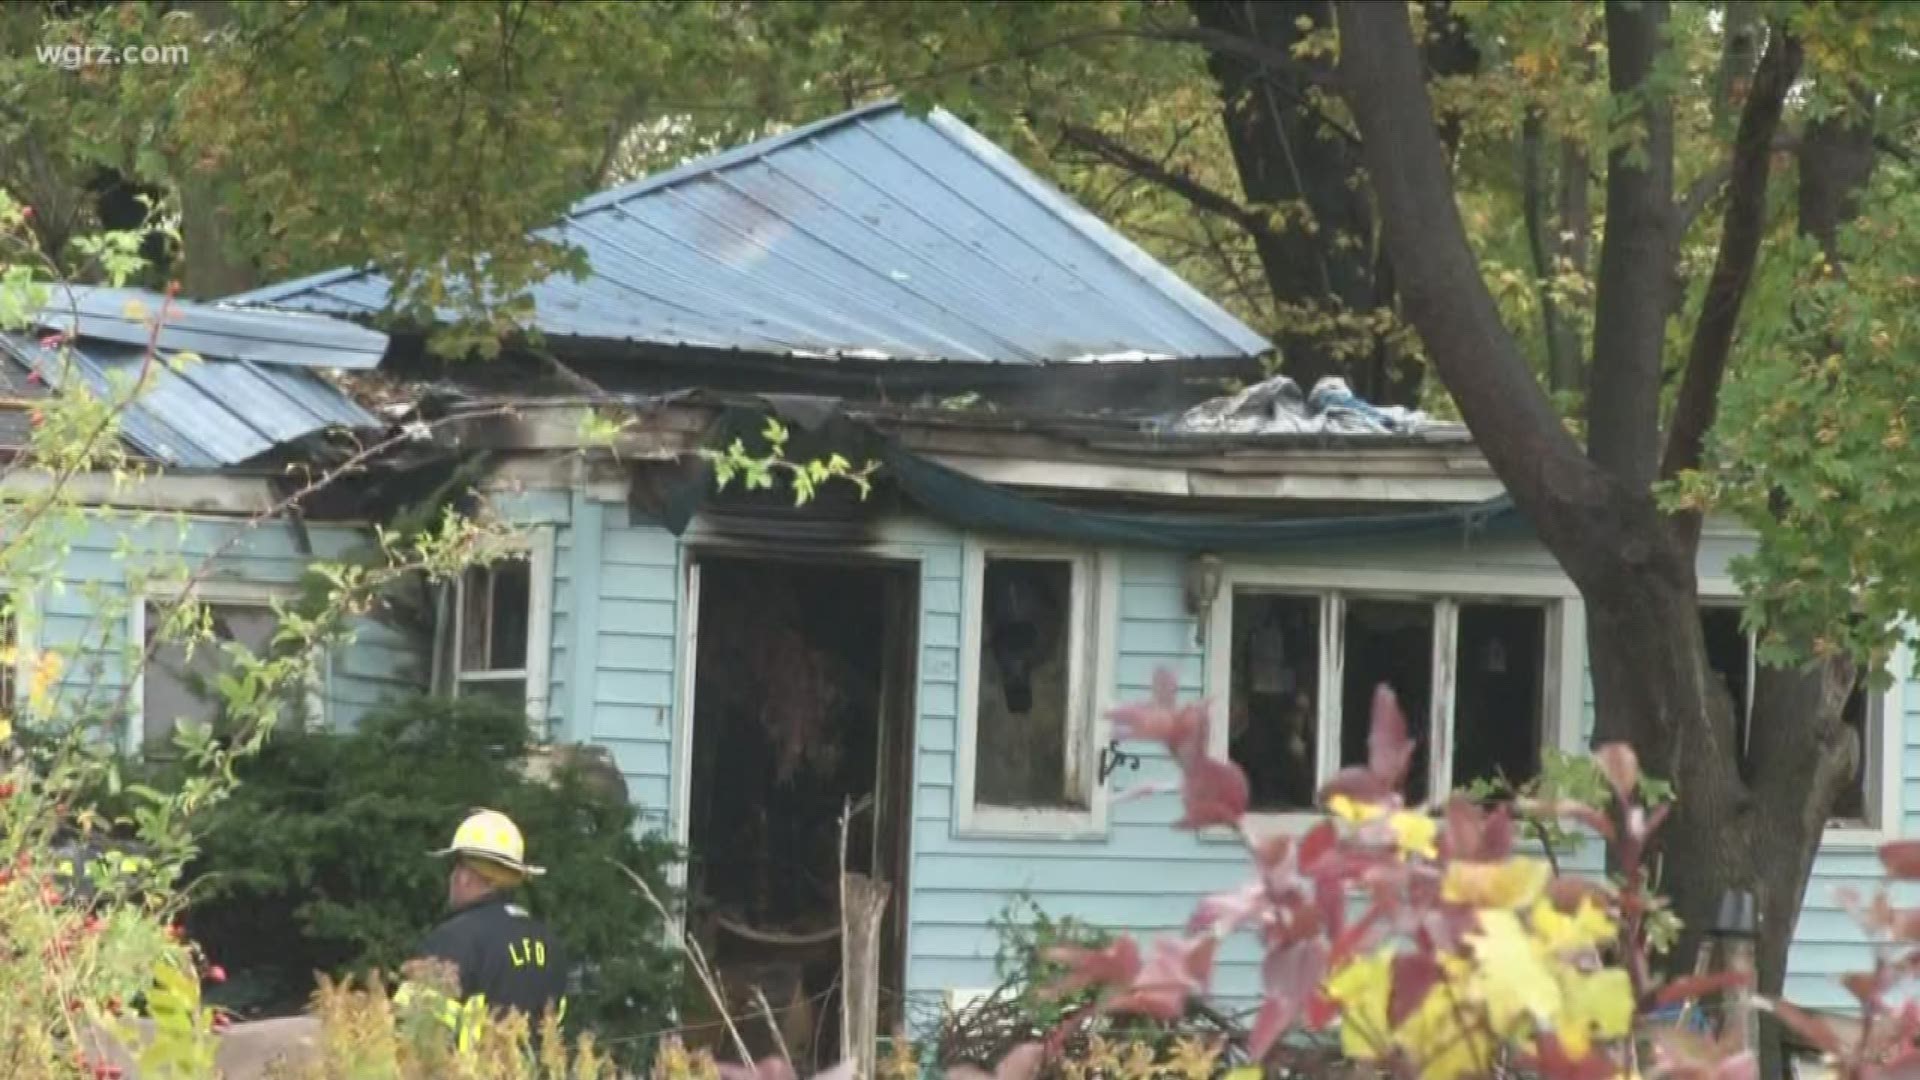 The 80-year old woman called 9-1-1 saying that her house was on fire and she could not get out